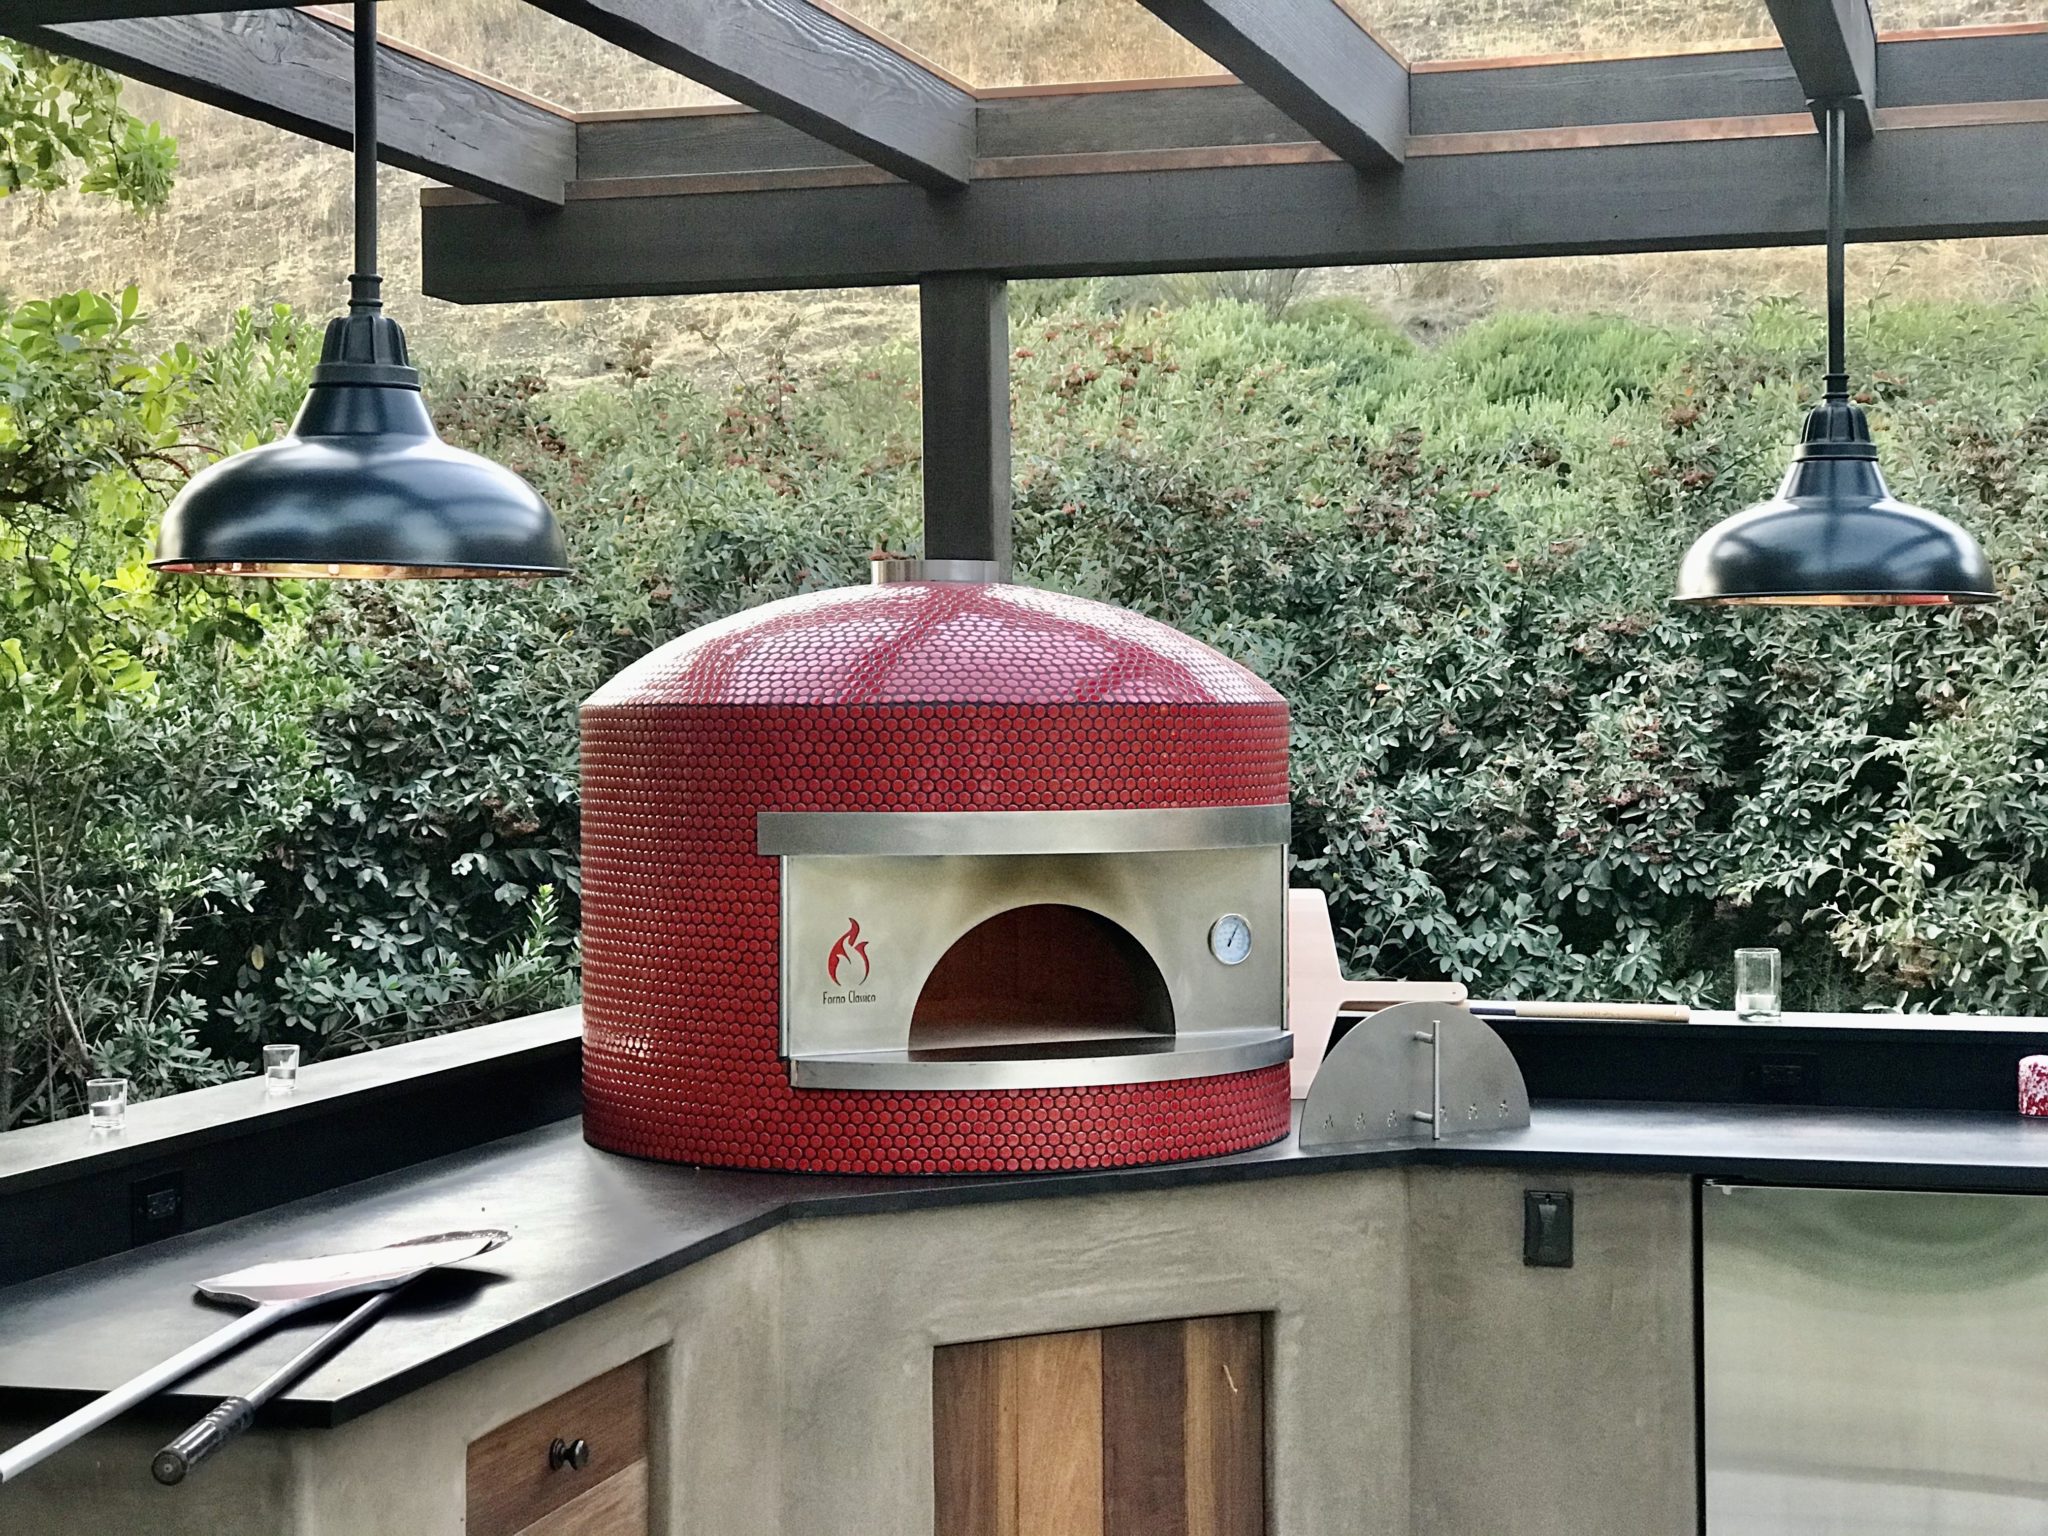 Residential Pizza Ovens